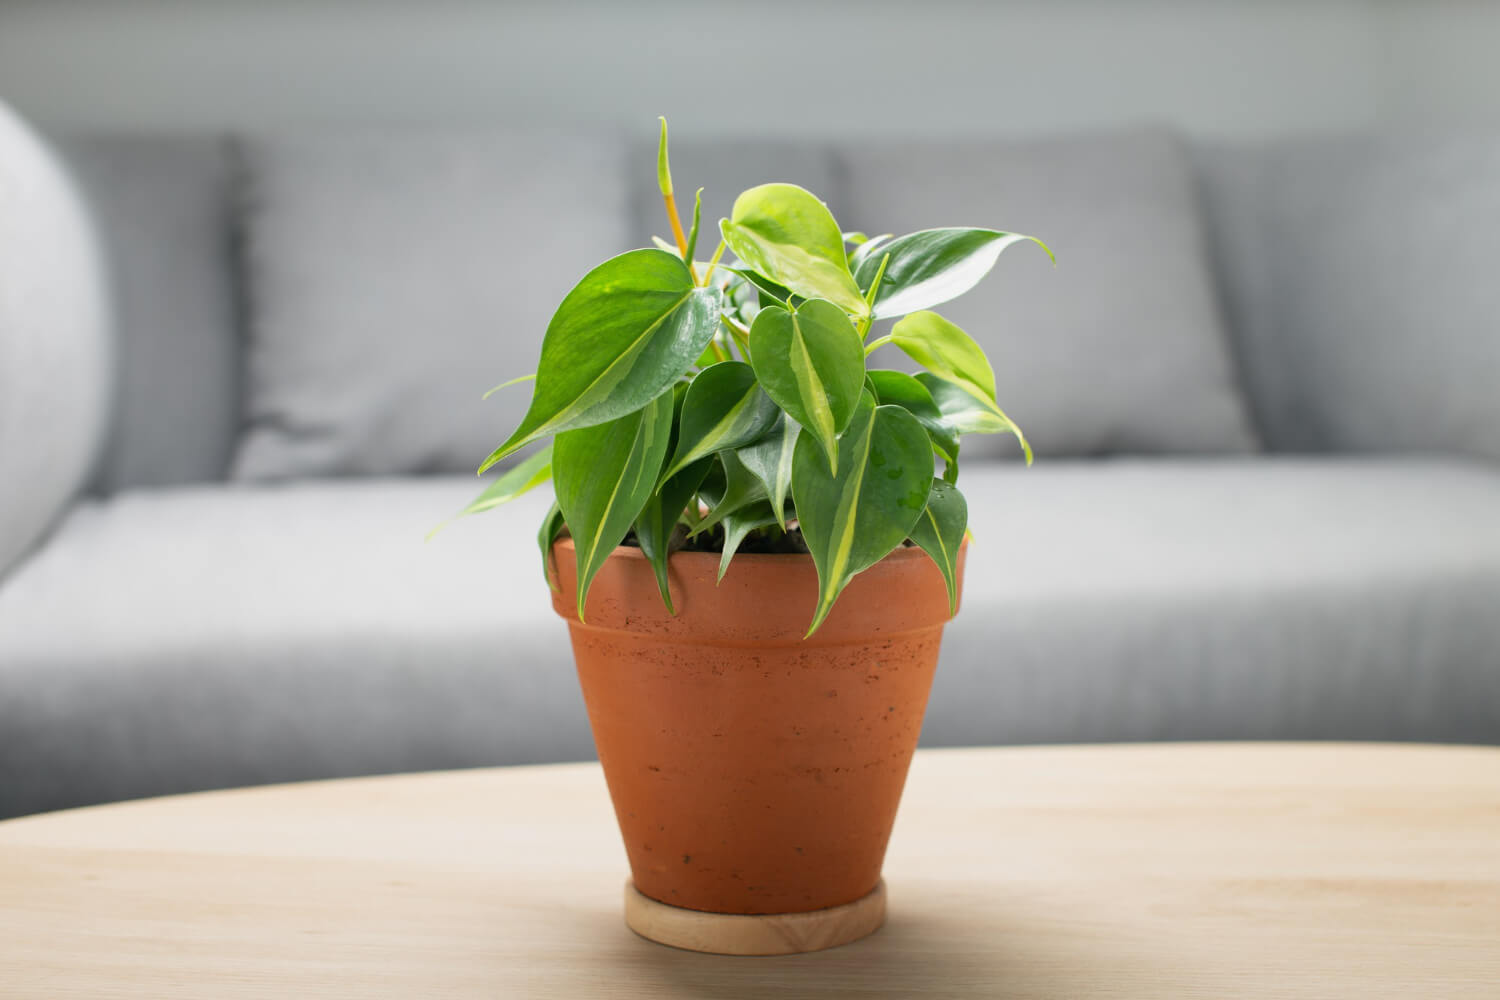 Air purifying plants – facts and myths